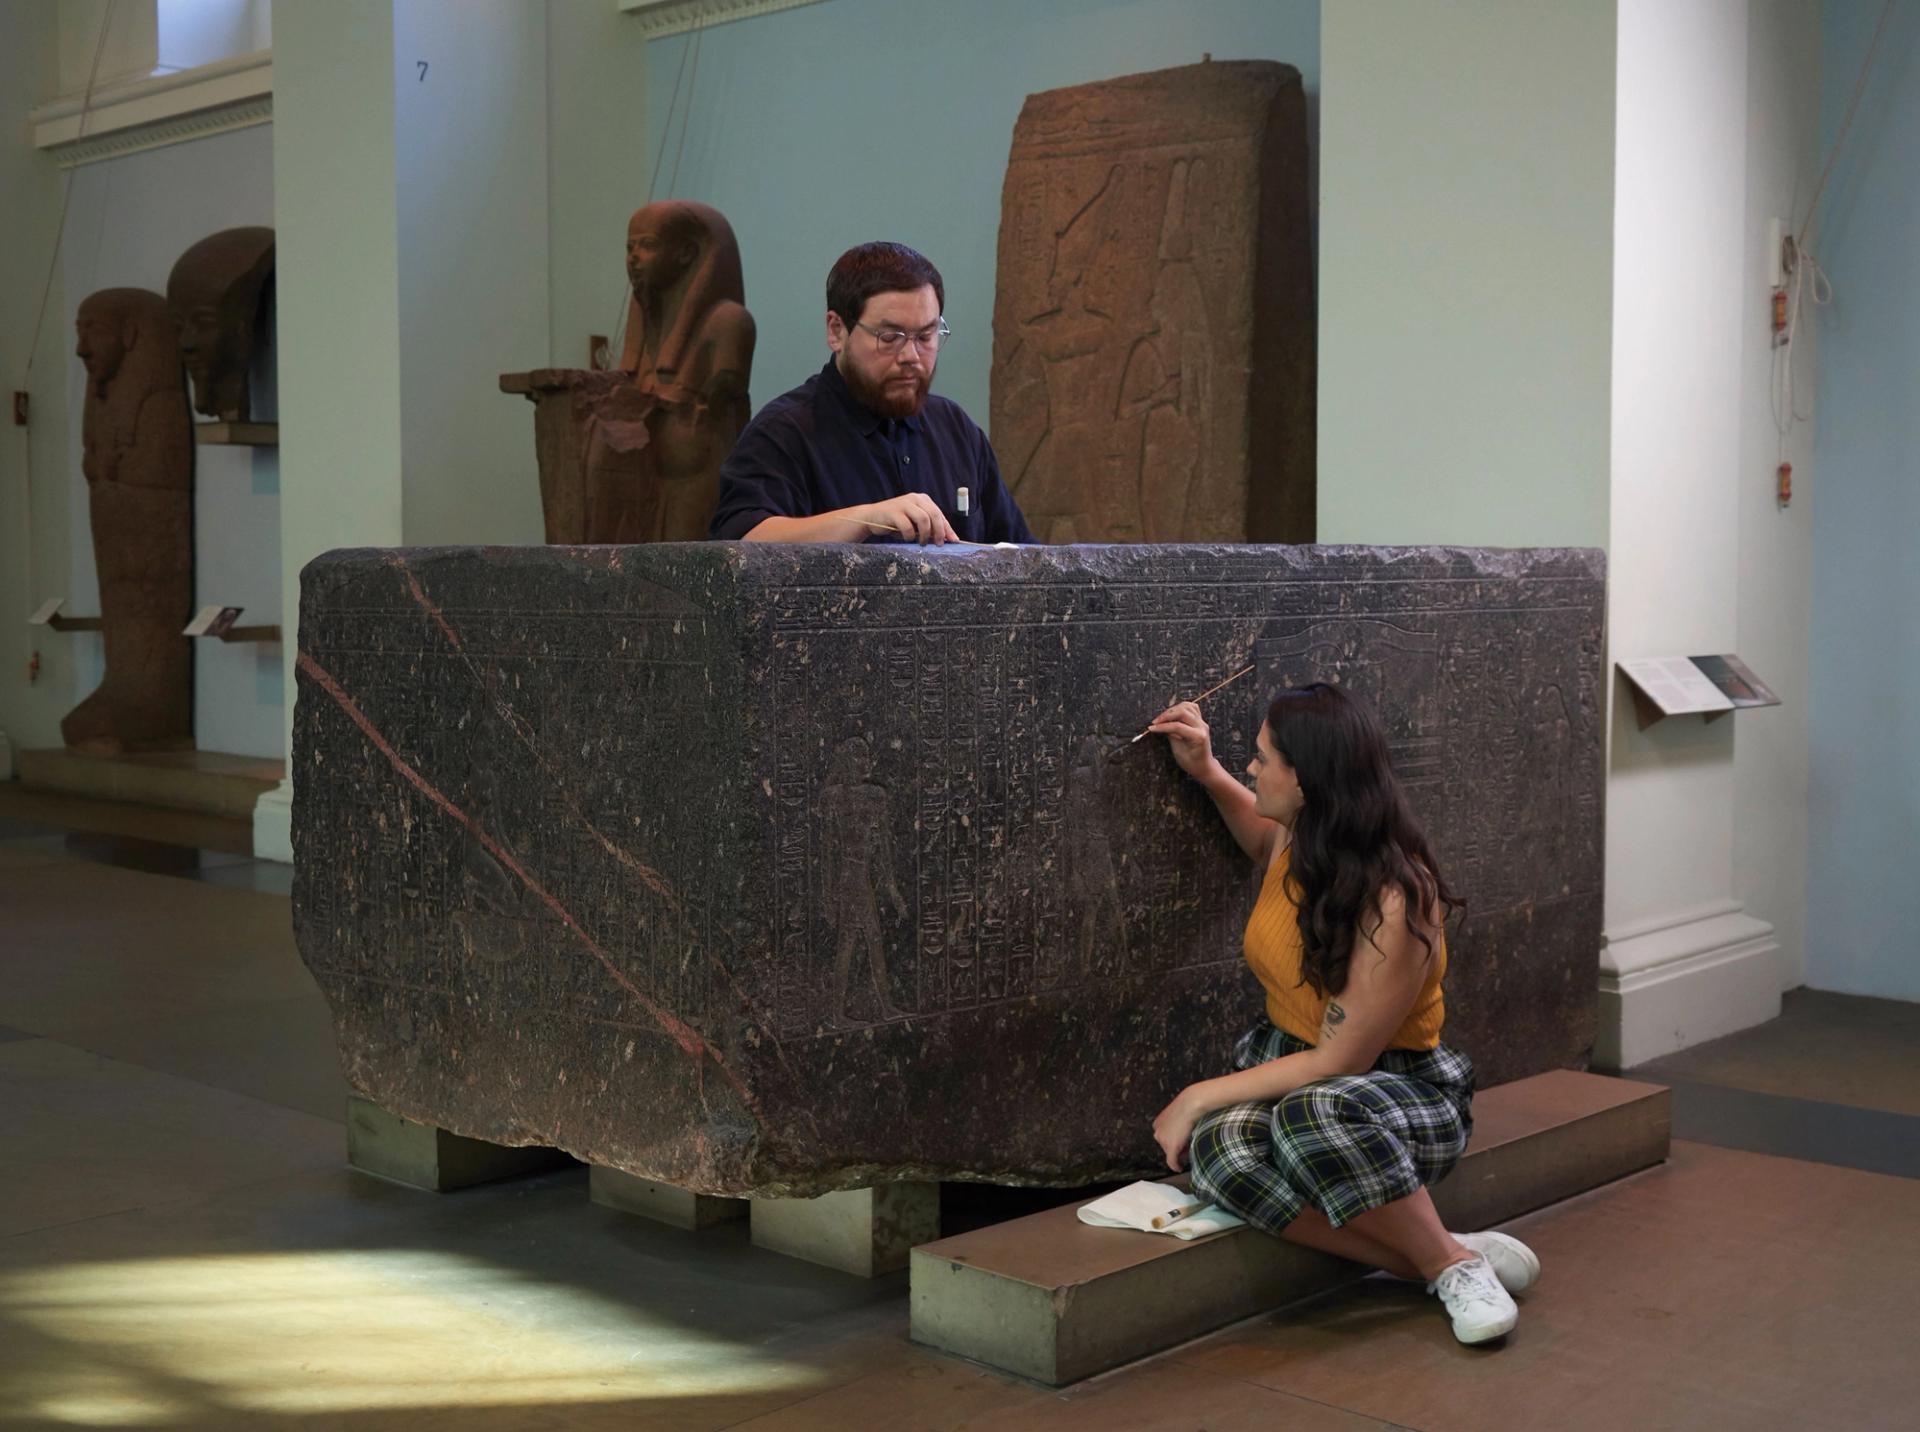 Senior conservator, Stephanie Vasiliou, and conservation student, Shoun Obana, clean The Enchanted Basin sarcophagus of Hapmen (600BC) at the British Museum, ahead of the exhibition © The Trustees of the British Museum